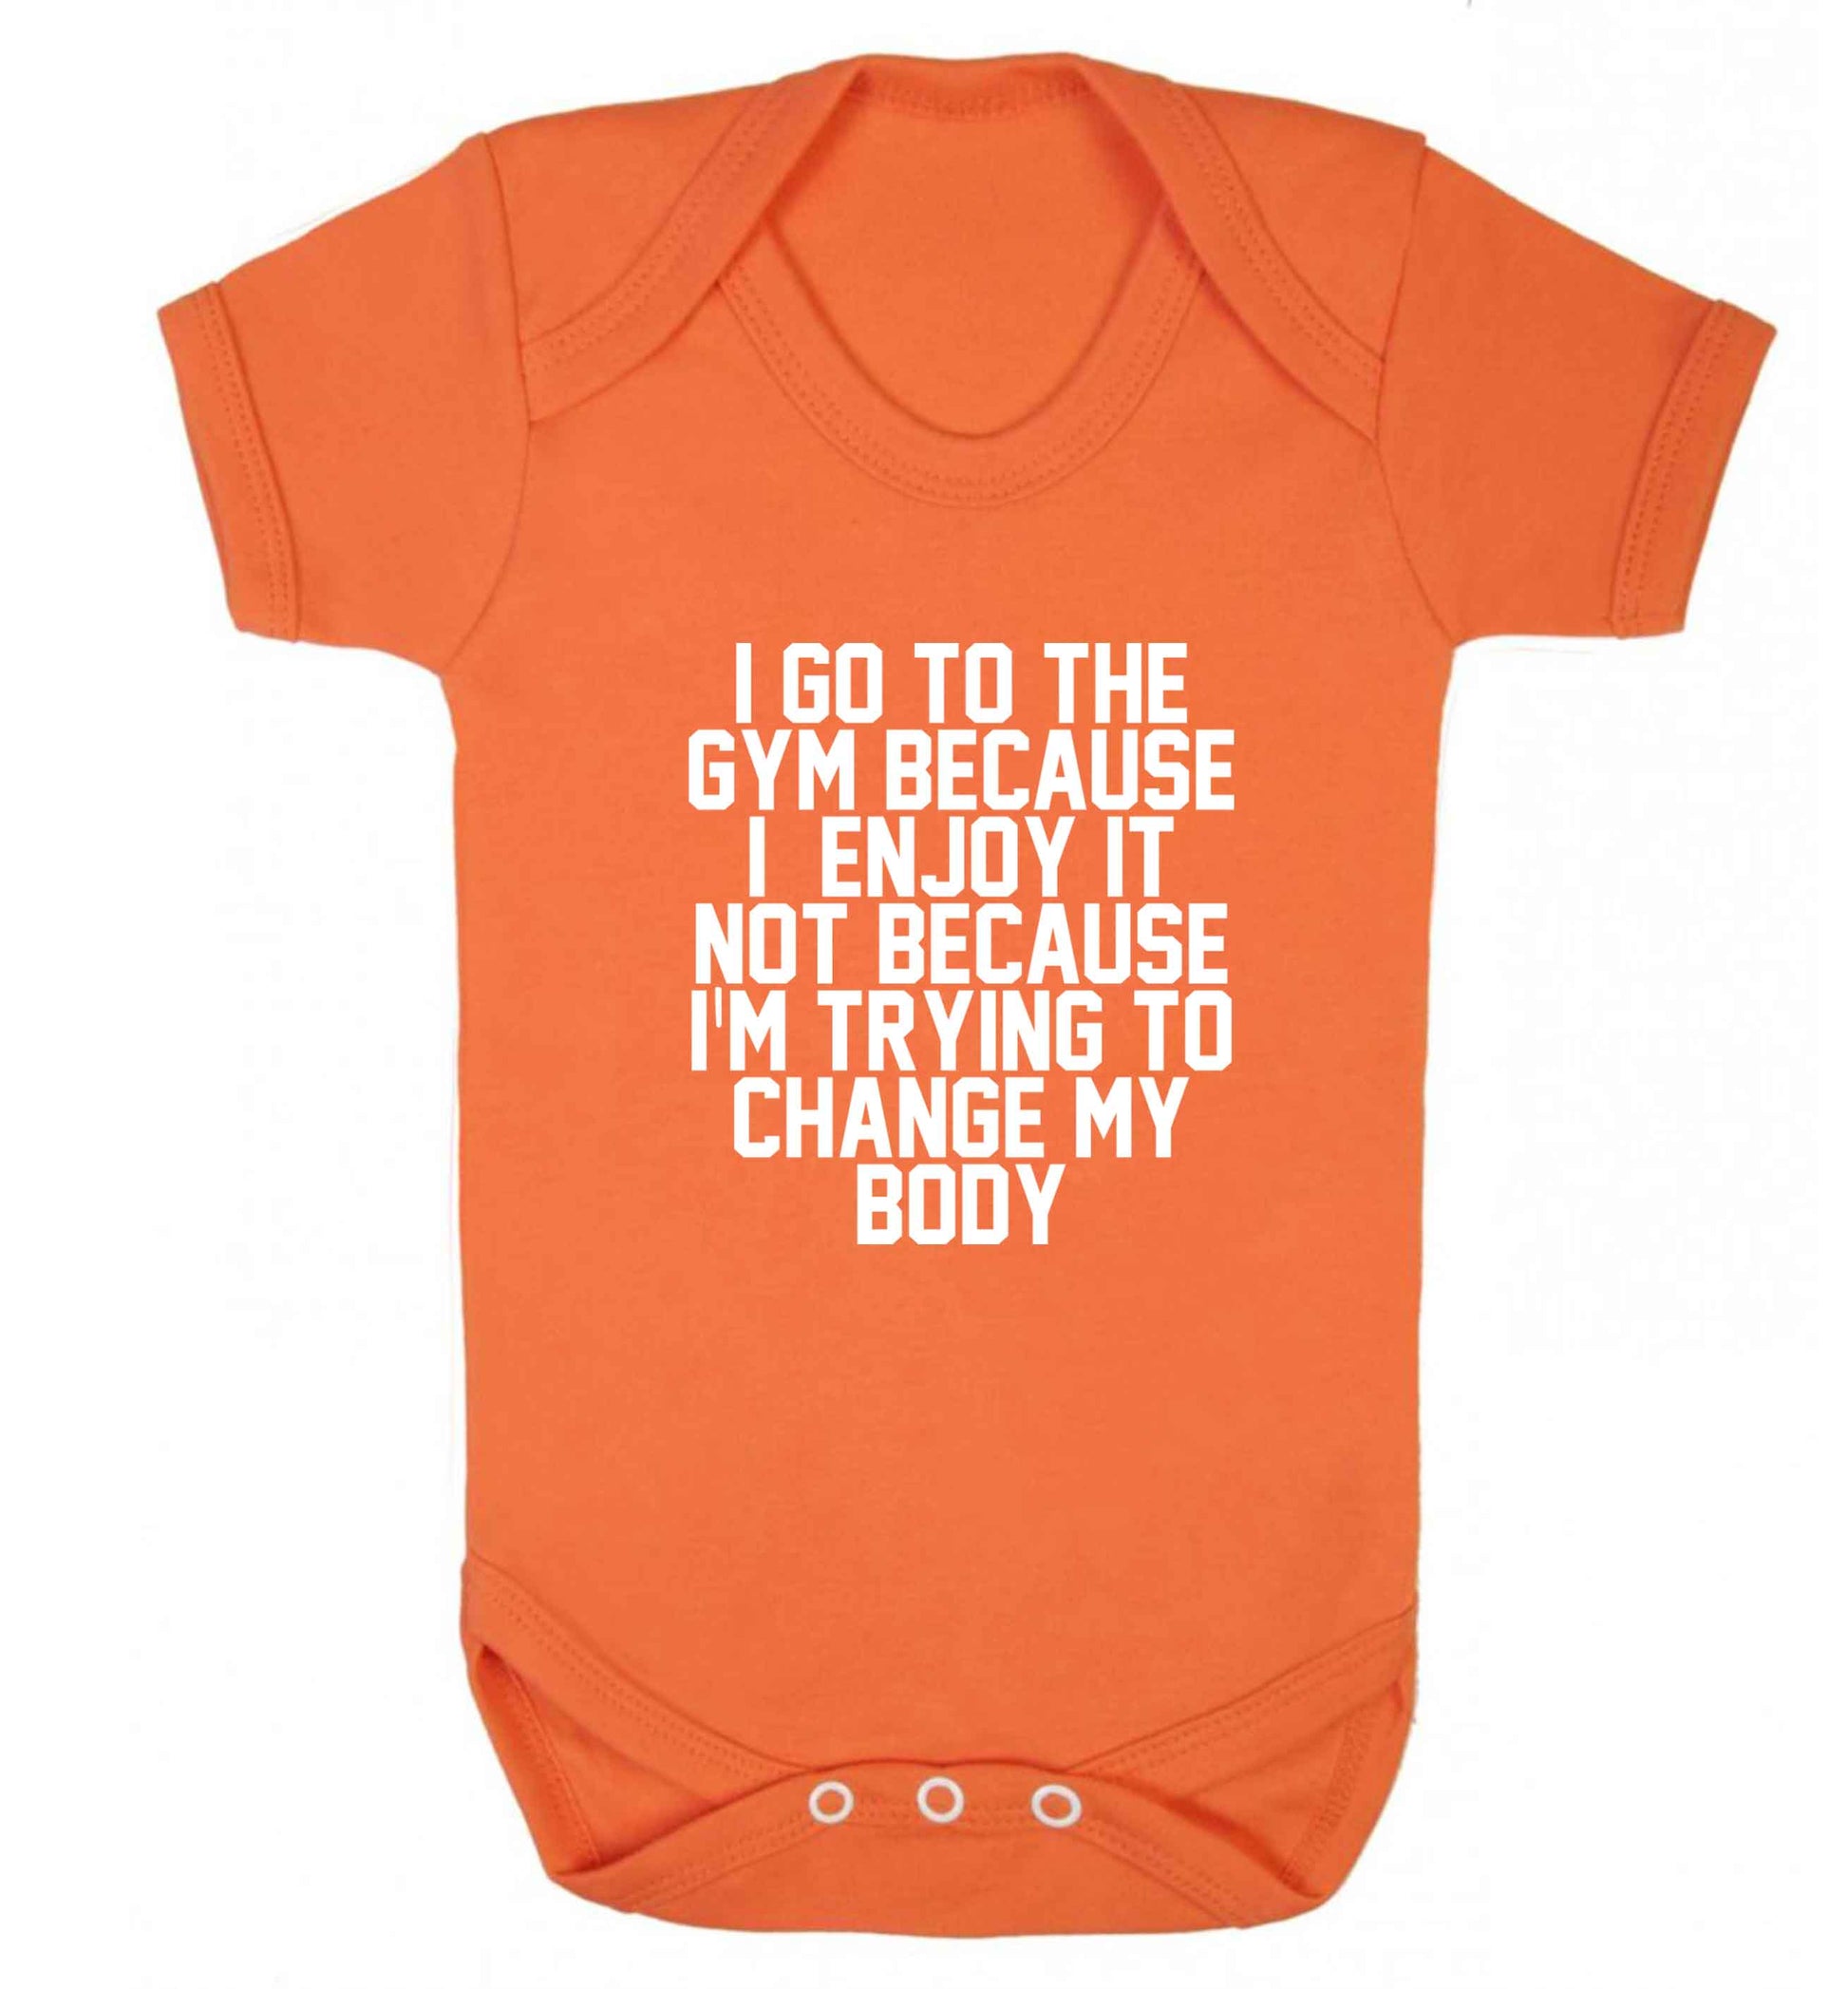 I go to the gym because I enjoy it not because I'm trying to change my body baby vest orange 18-24 months